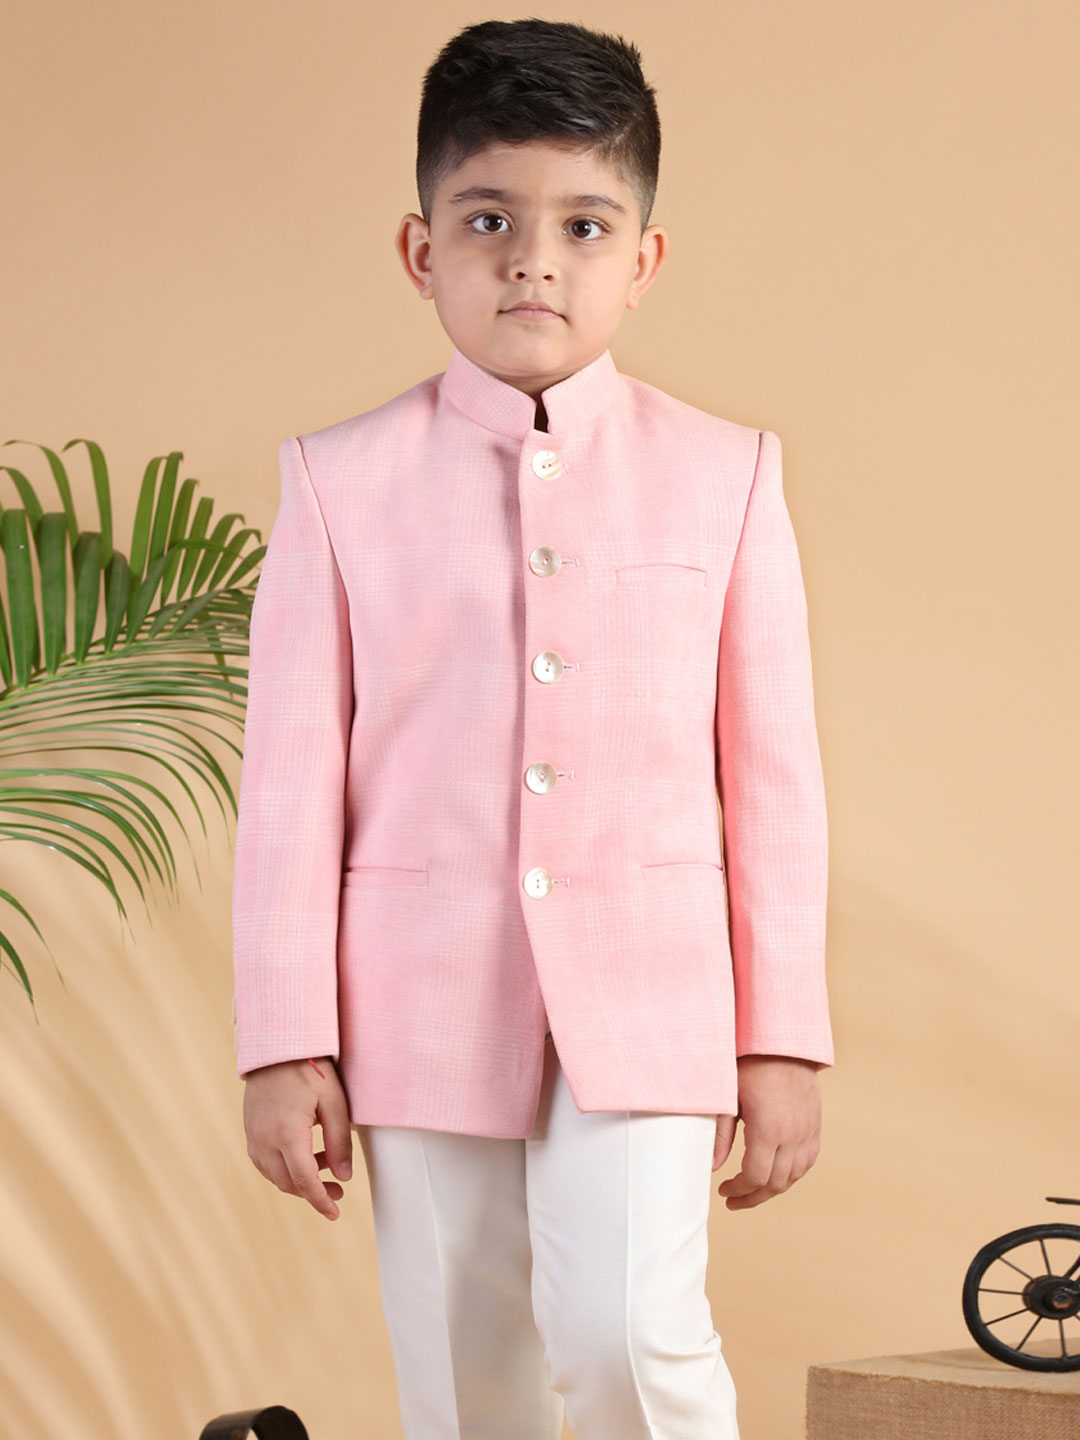 G3 Surat - A couple outfits in a Jodhpuri suits & Gown for